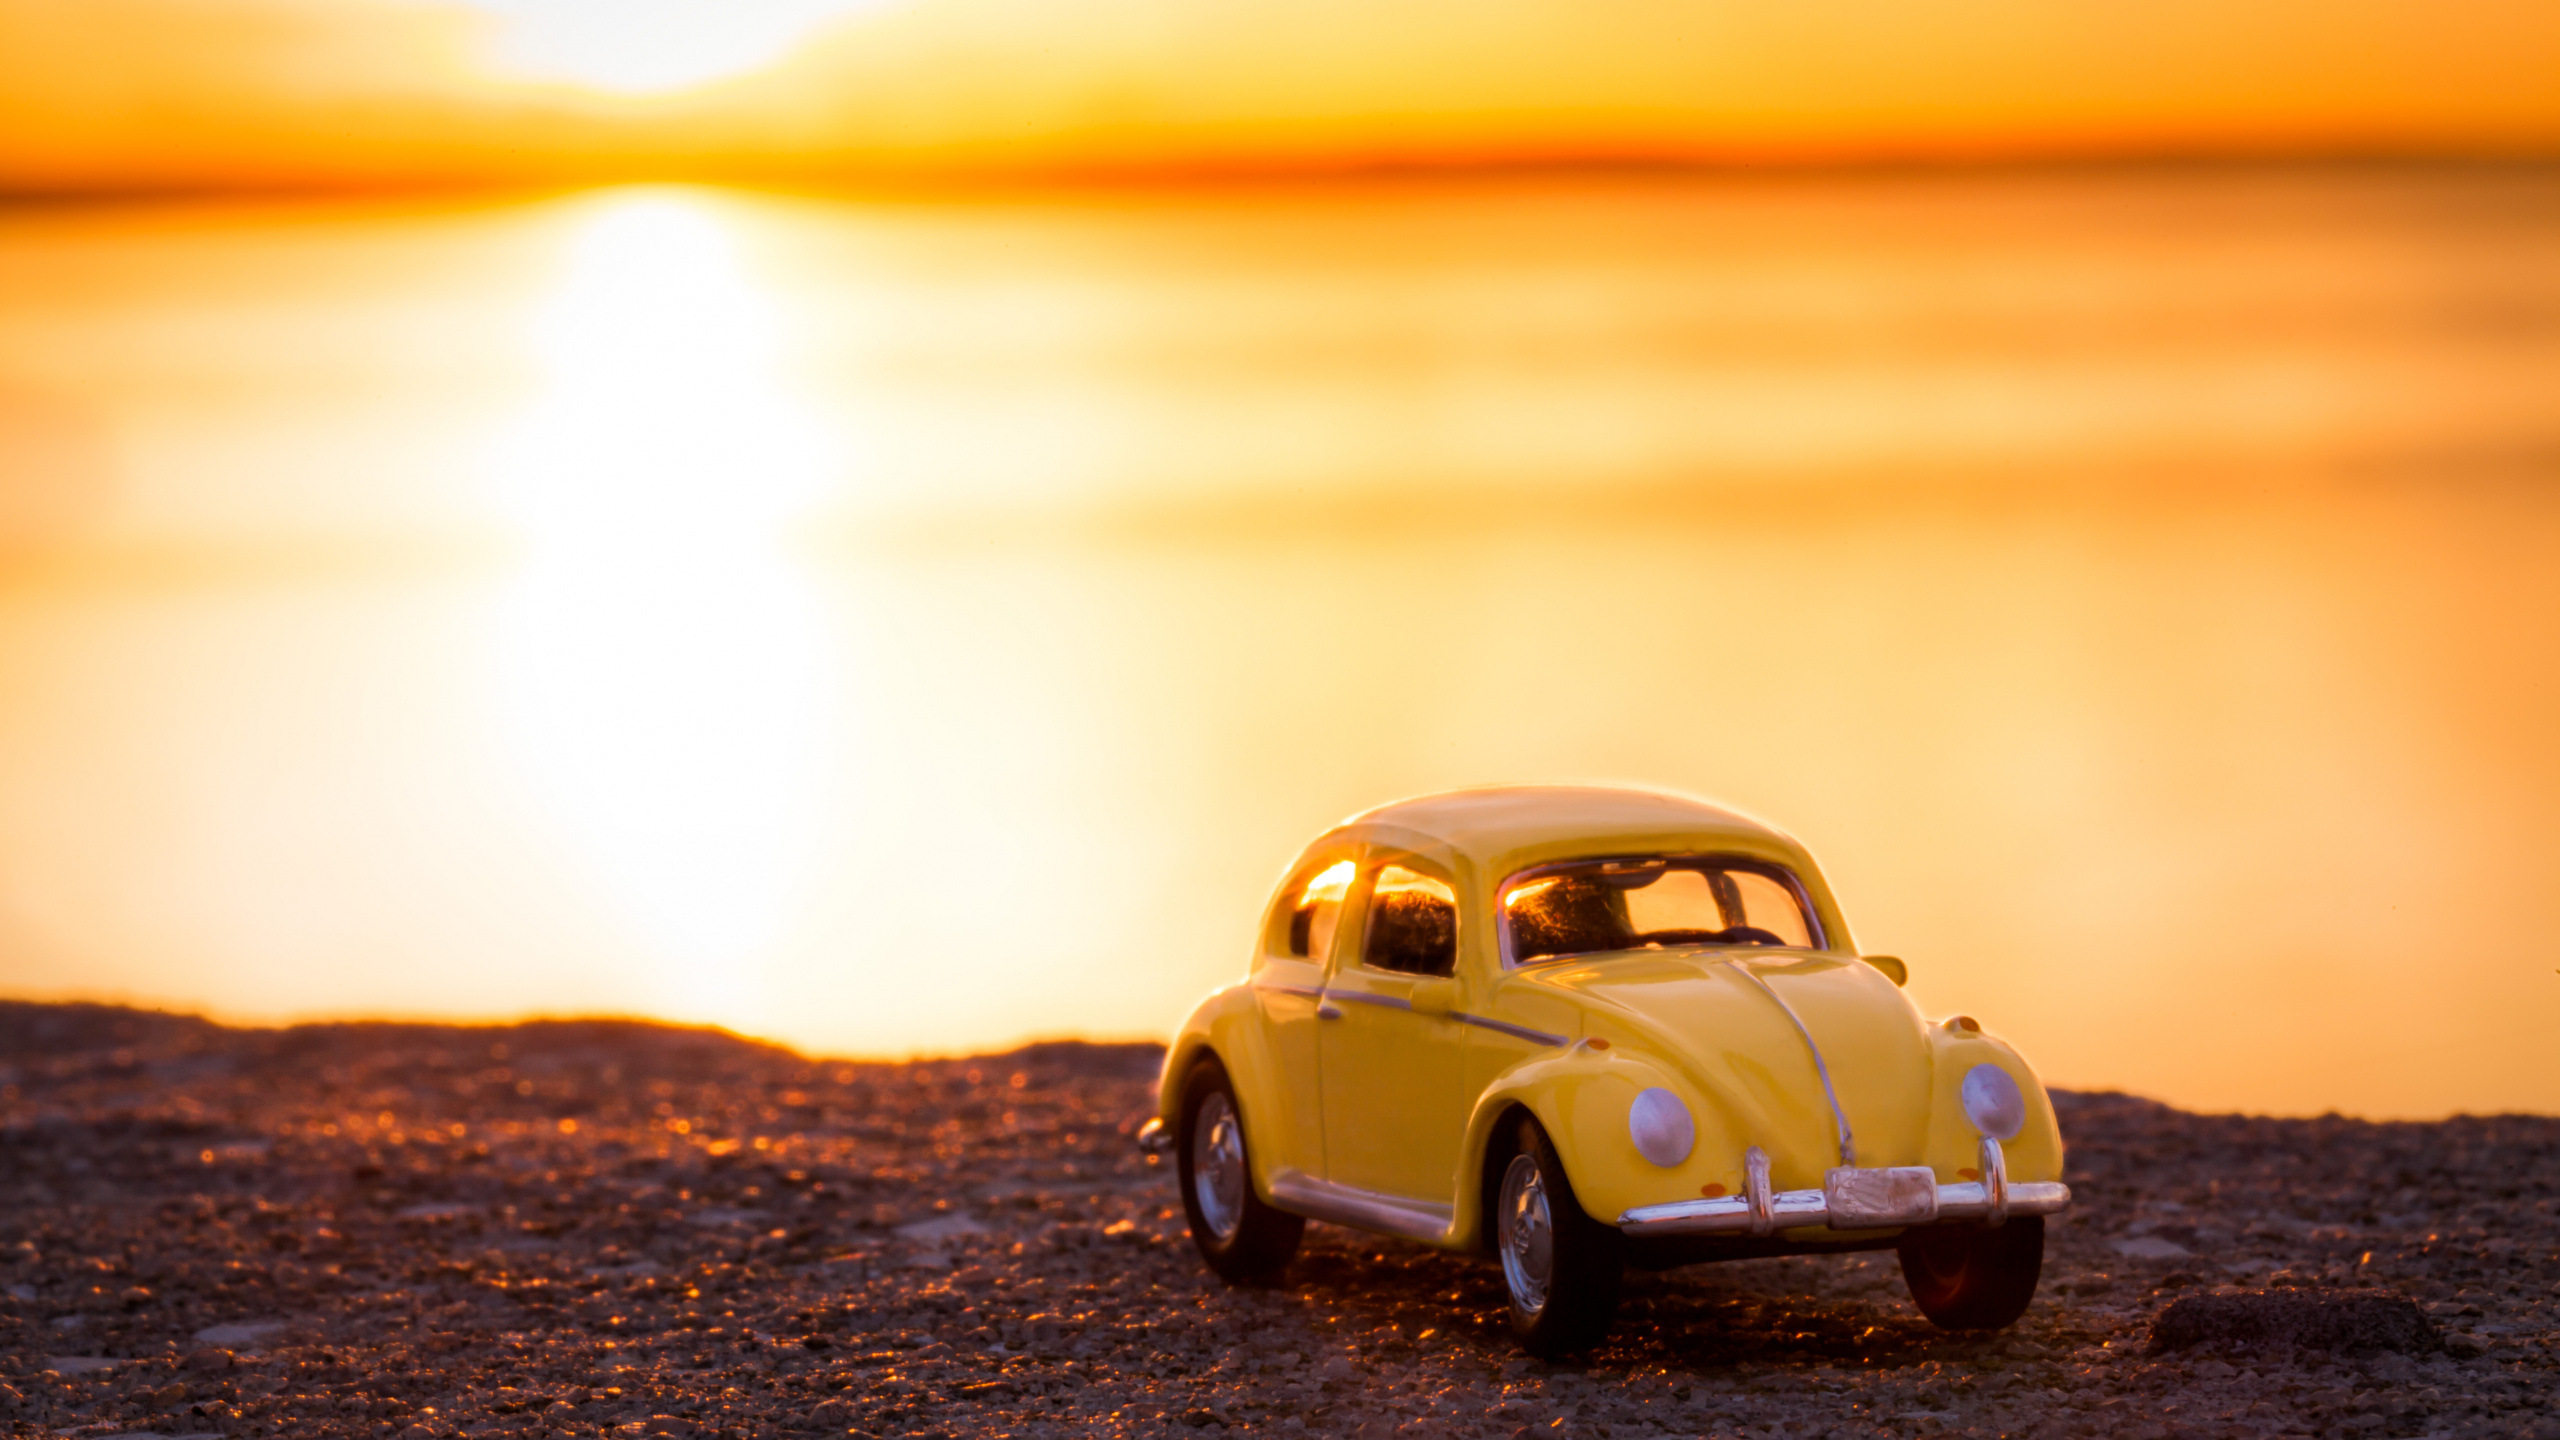 Yellow Volkswagen Beetle on Shore During Sunset. Wallpaper in 2560x1440 Resolution